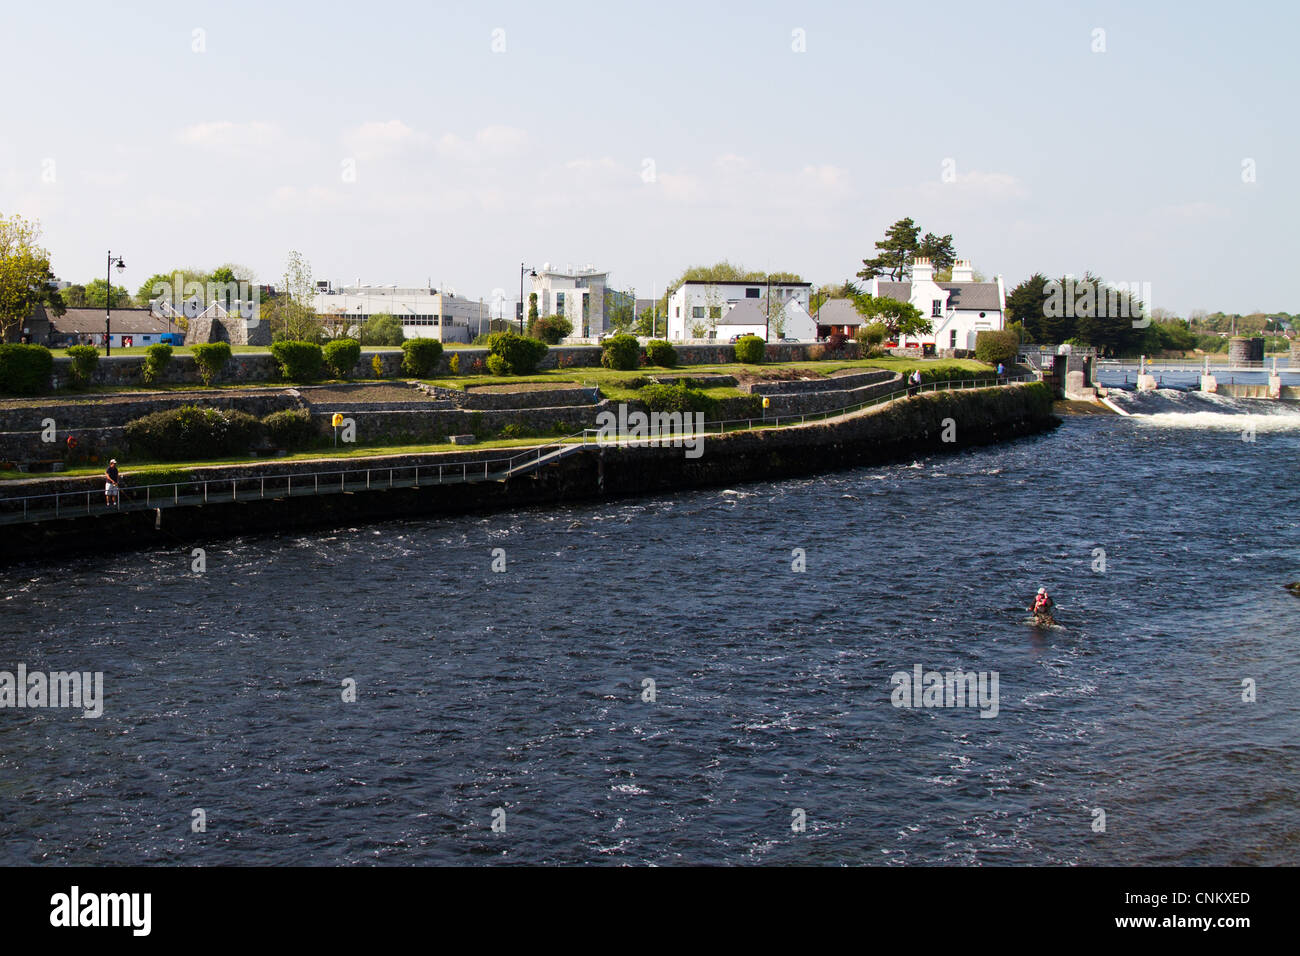 The river corrib flowing through the city of Galway Ireland Stock Photo